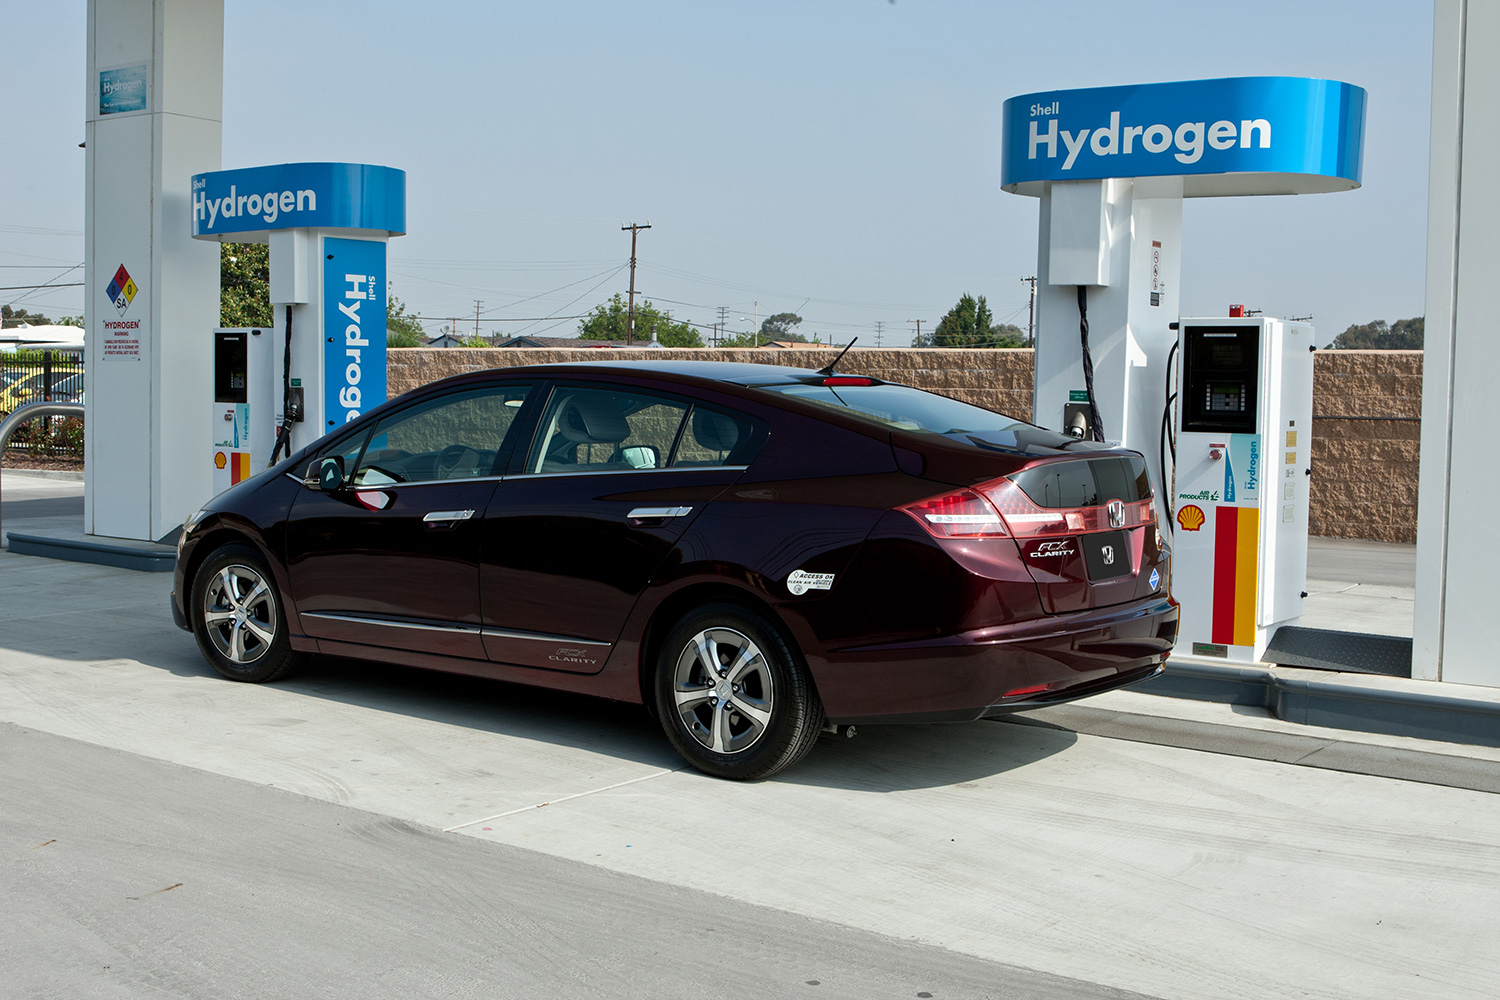 Hydrogen fuel cell cars are here, but are they worth the trouble?